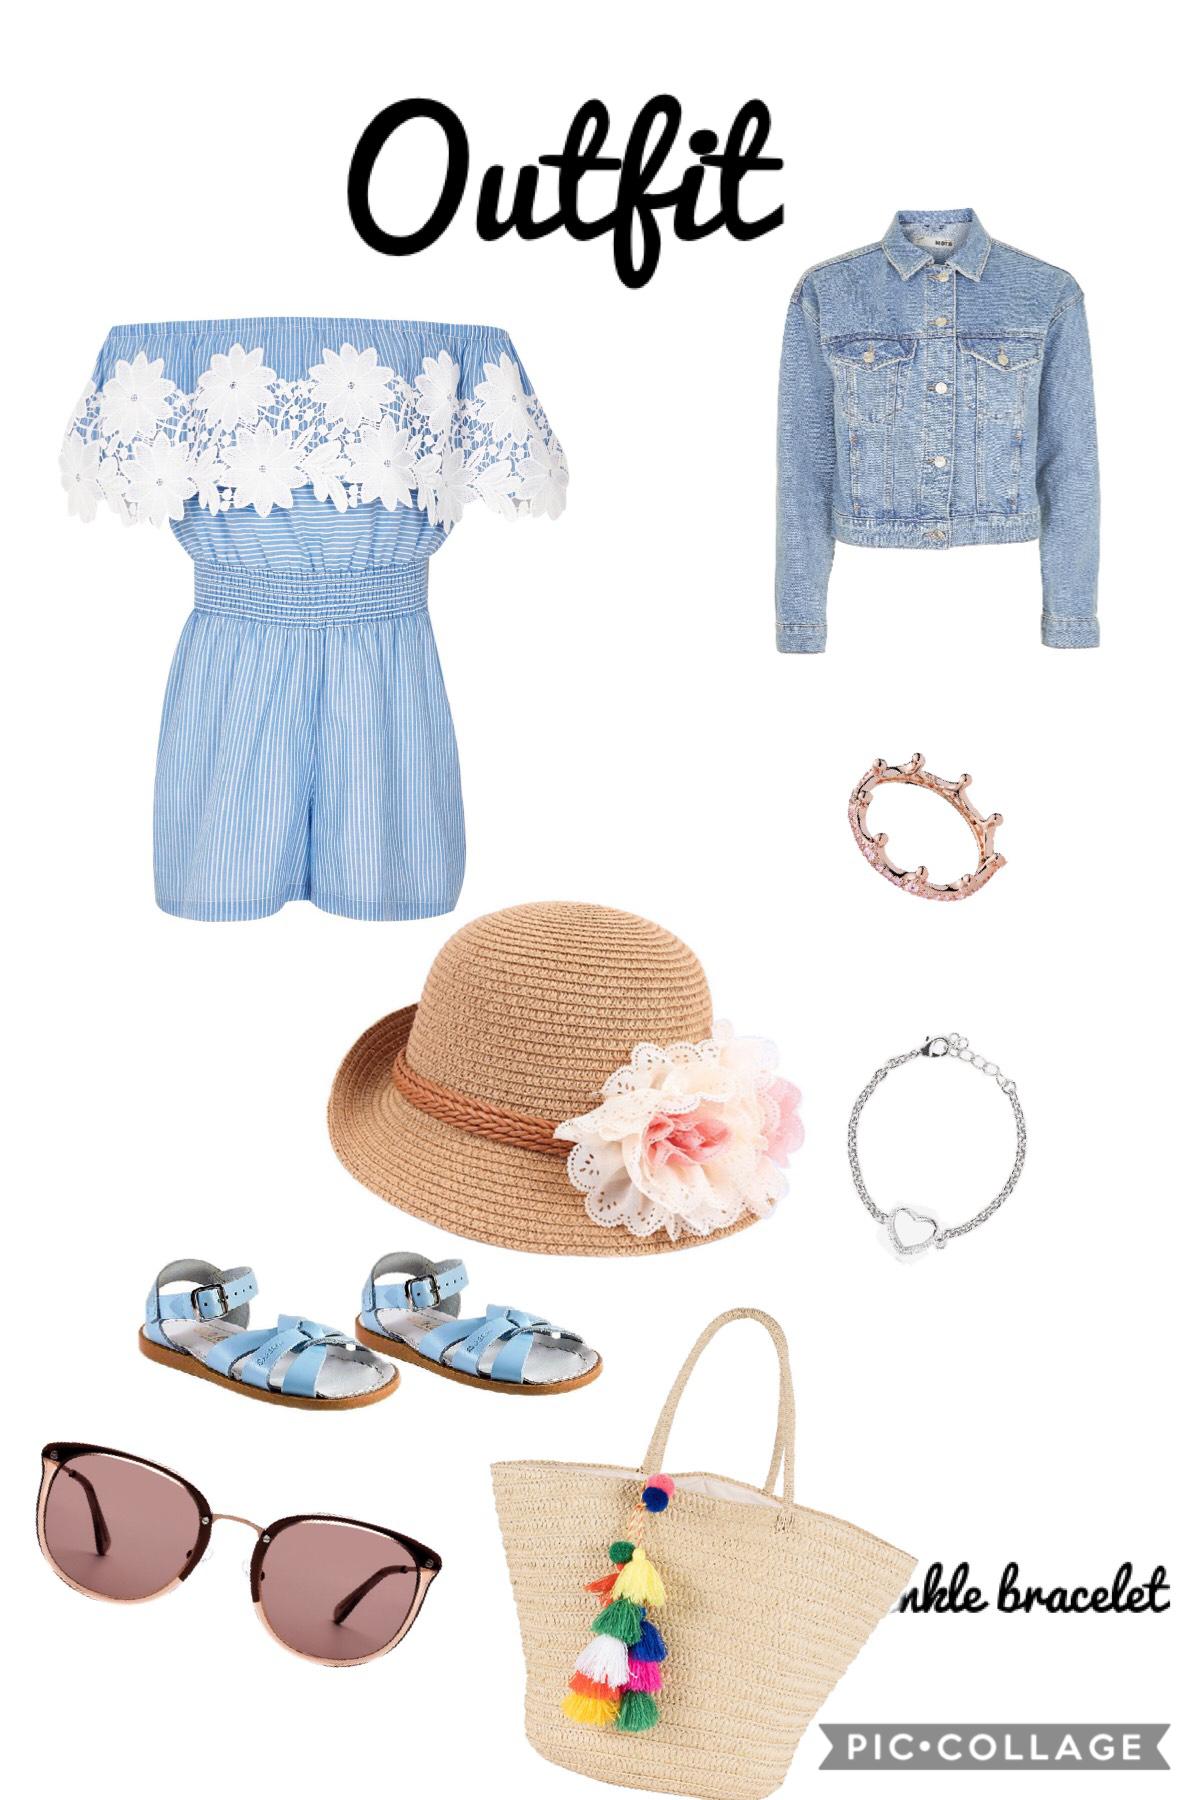 What a cute summer outfit! I would definitely wear that in the summer!!